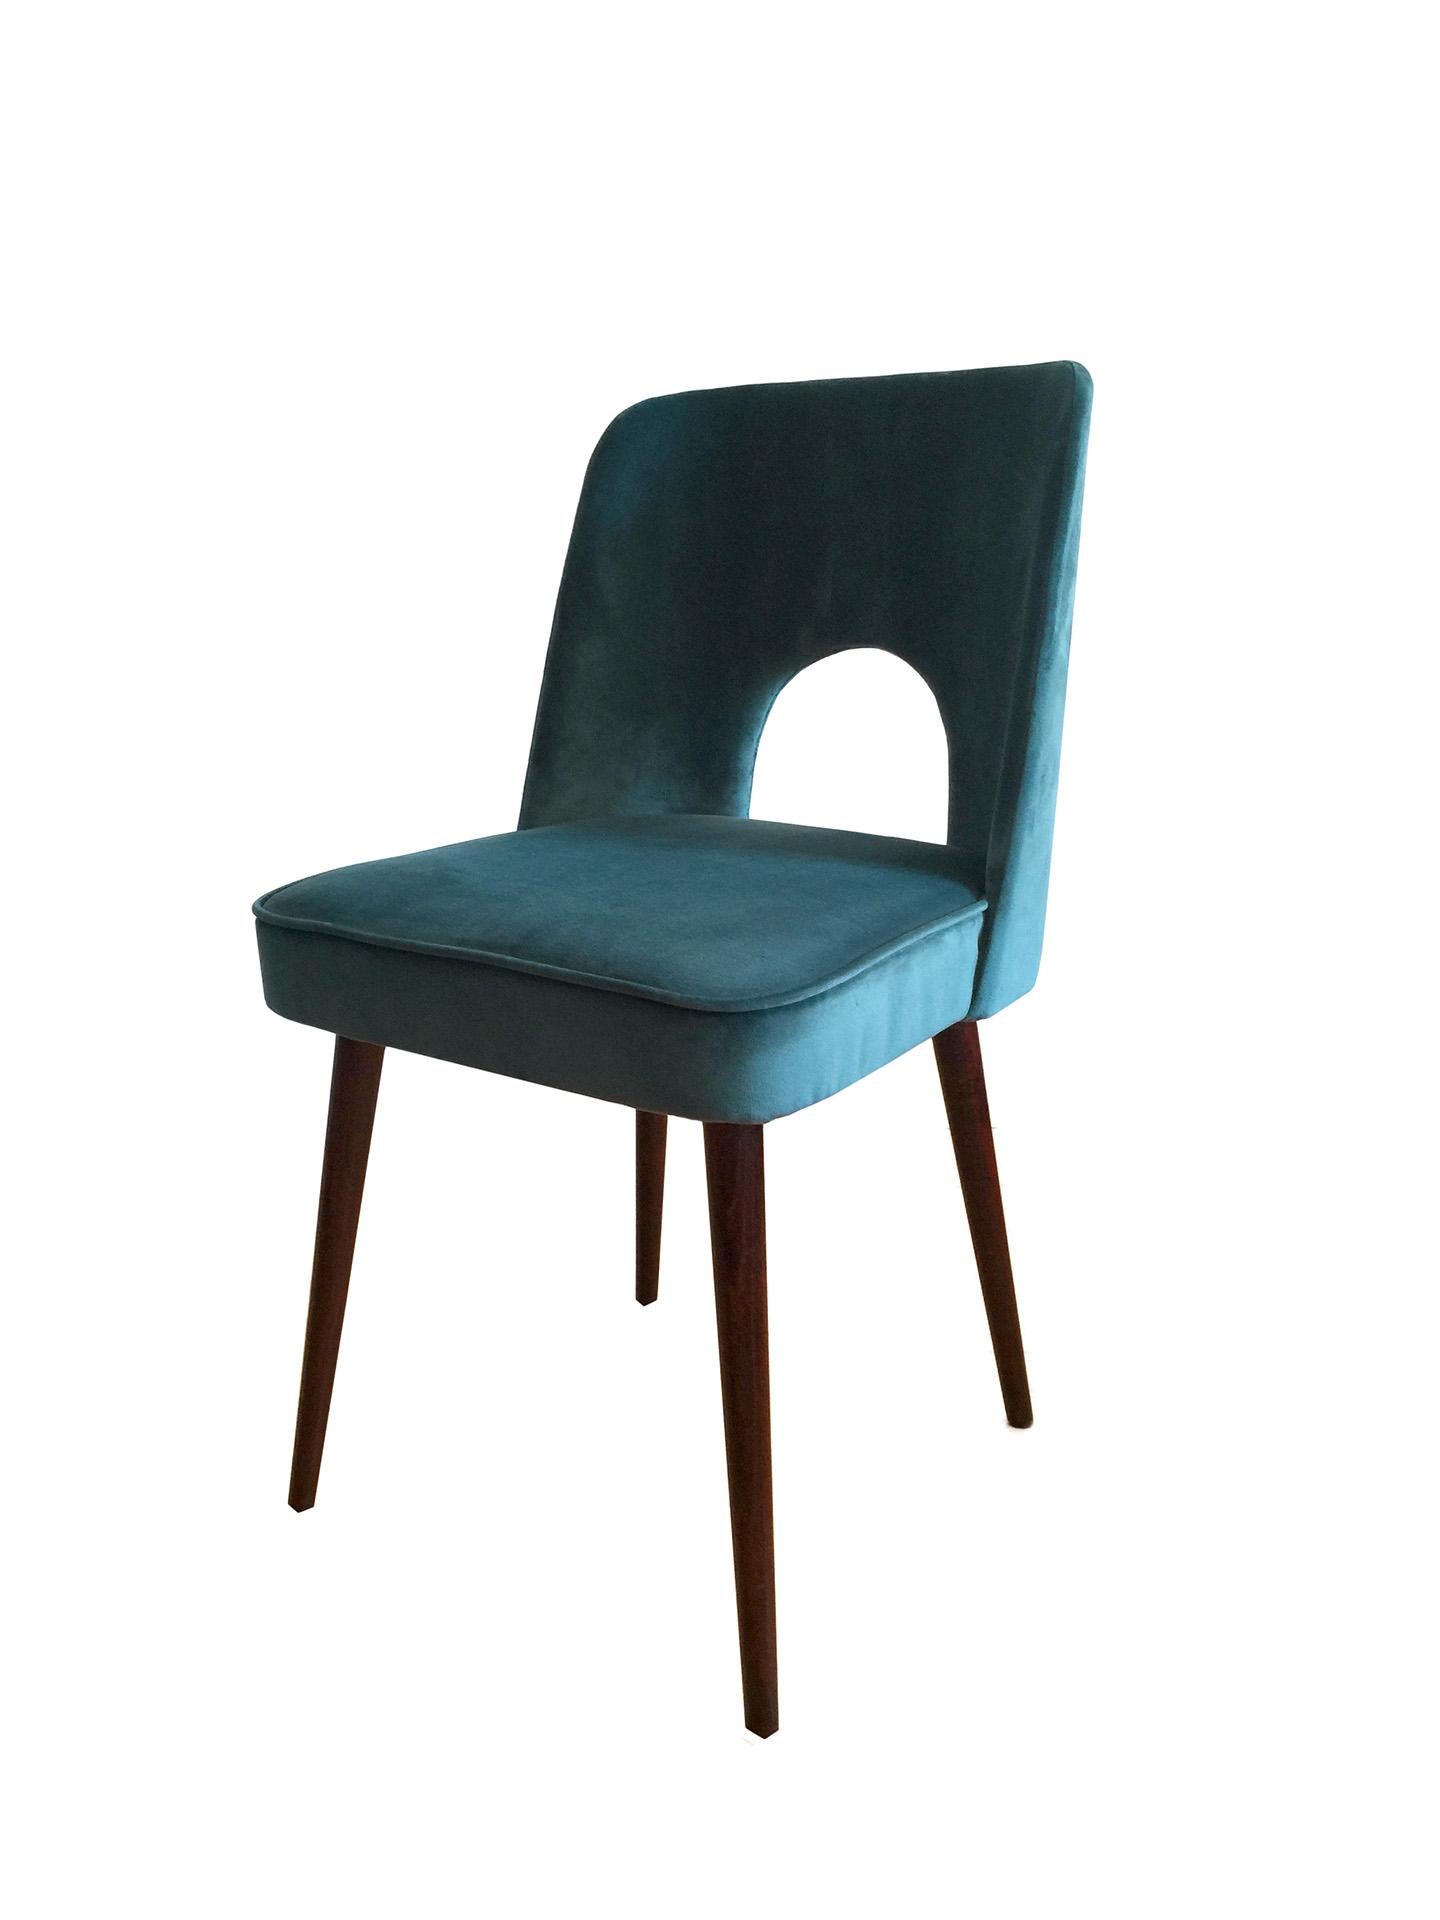 This dining chair with a modernist silhouette was designed in the 1960s and manufactured by Slupskie Fabryki Mebli in Poland. The structure is made of plywood and beech. The upholstery is made of high-quality fabric in a deep sea-blue color. The